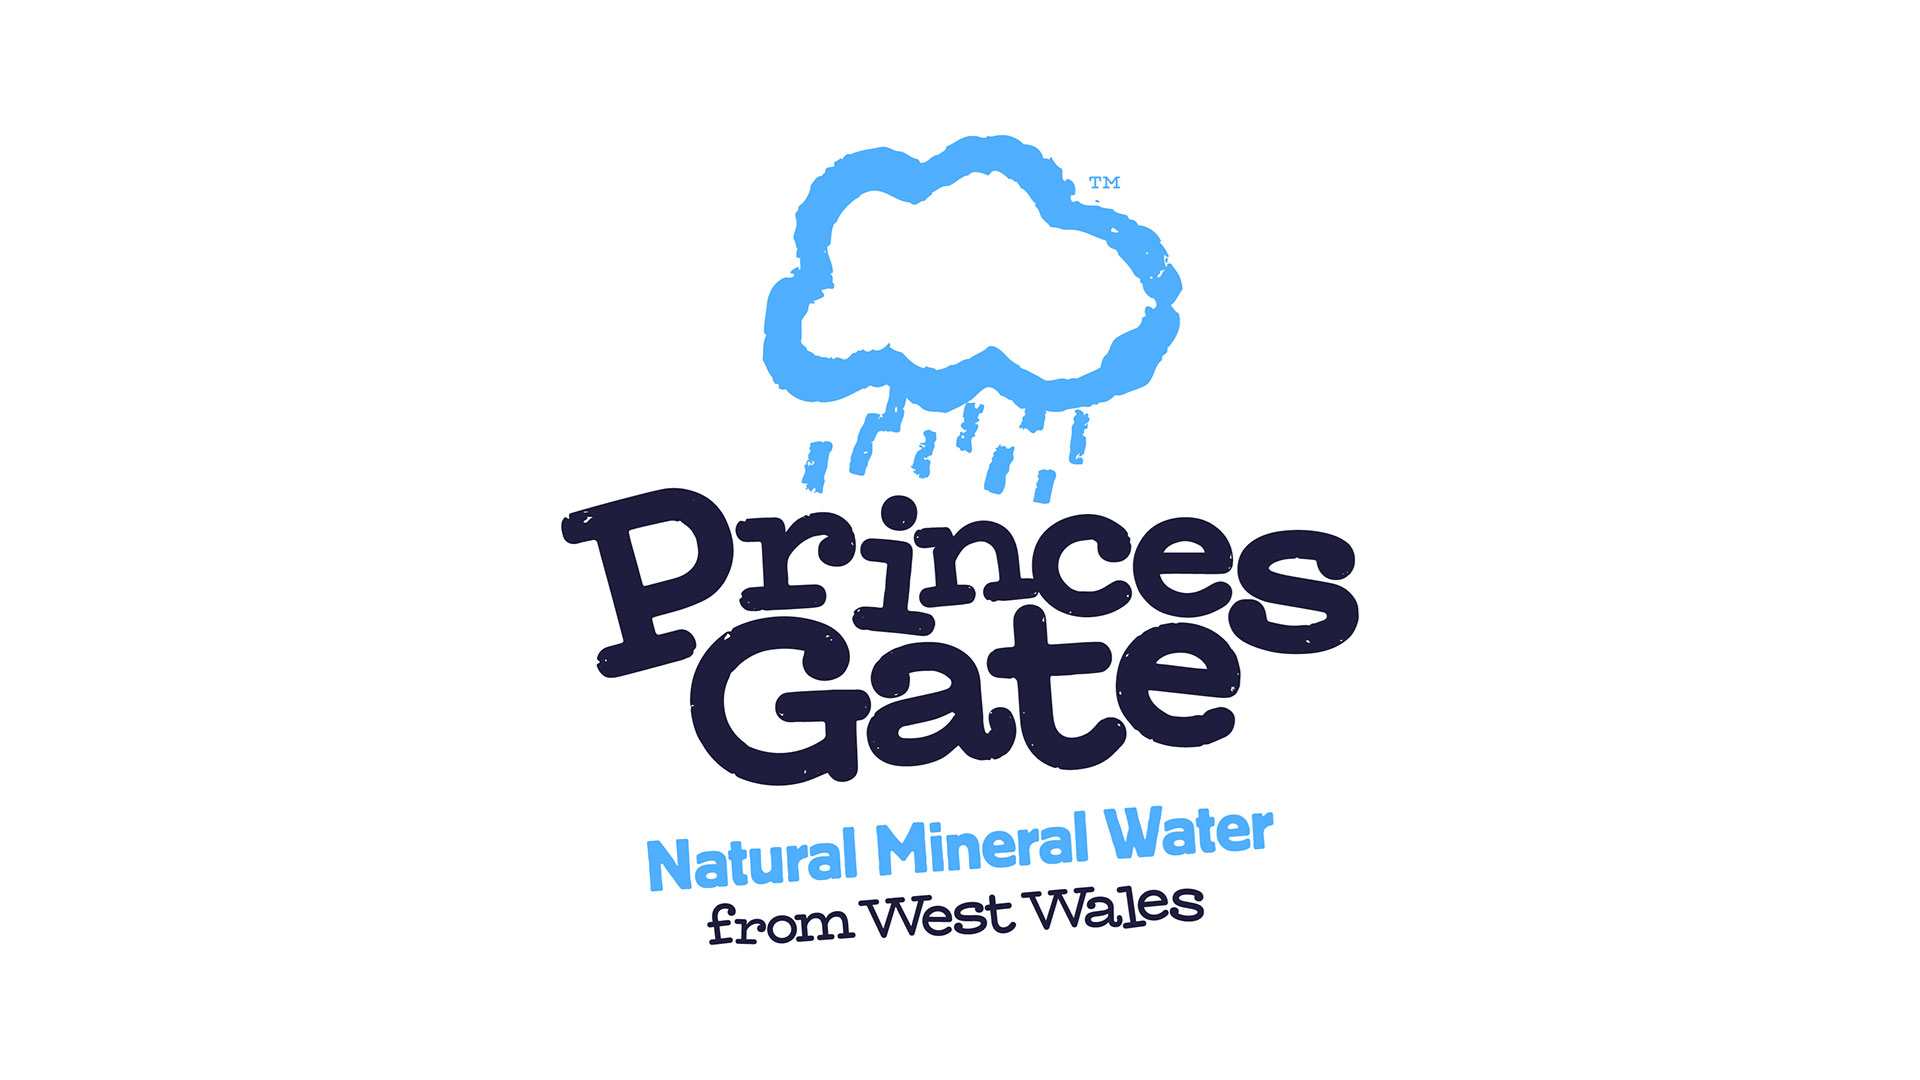 Princes Gate, natural mineral water from west Wales logo.